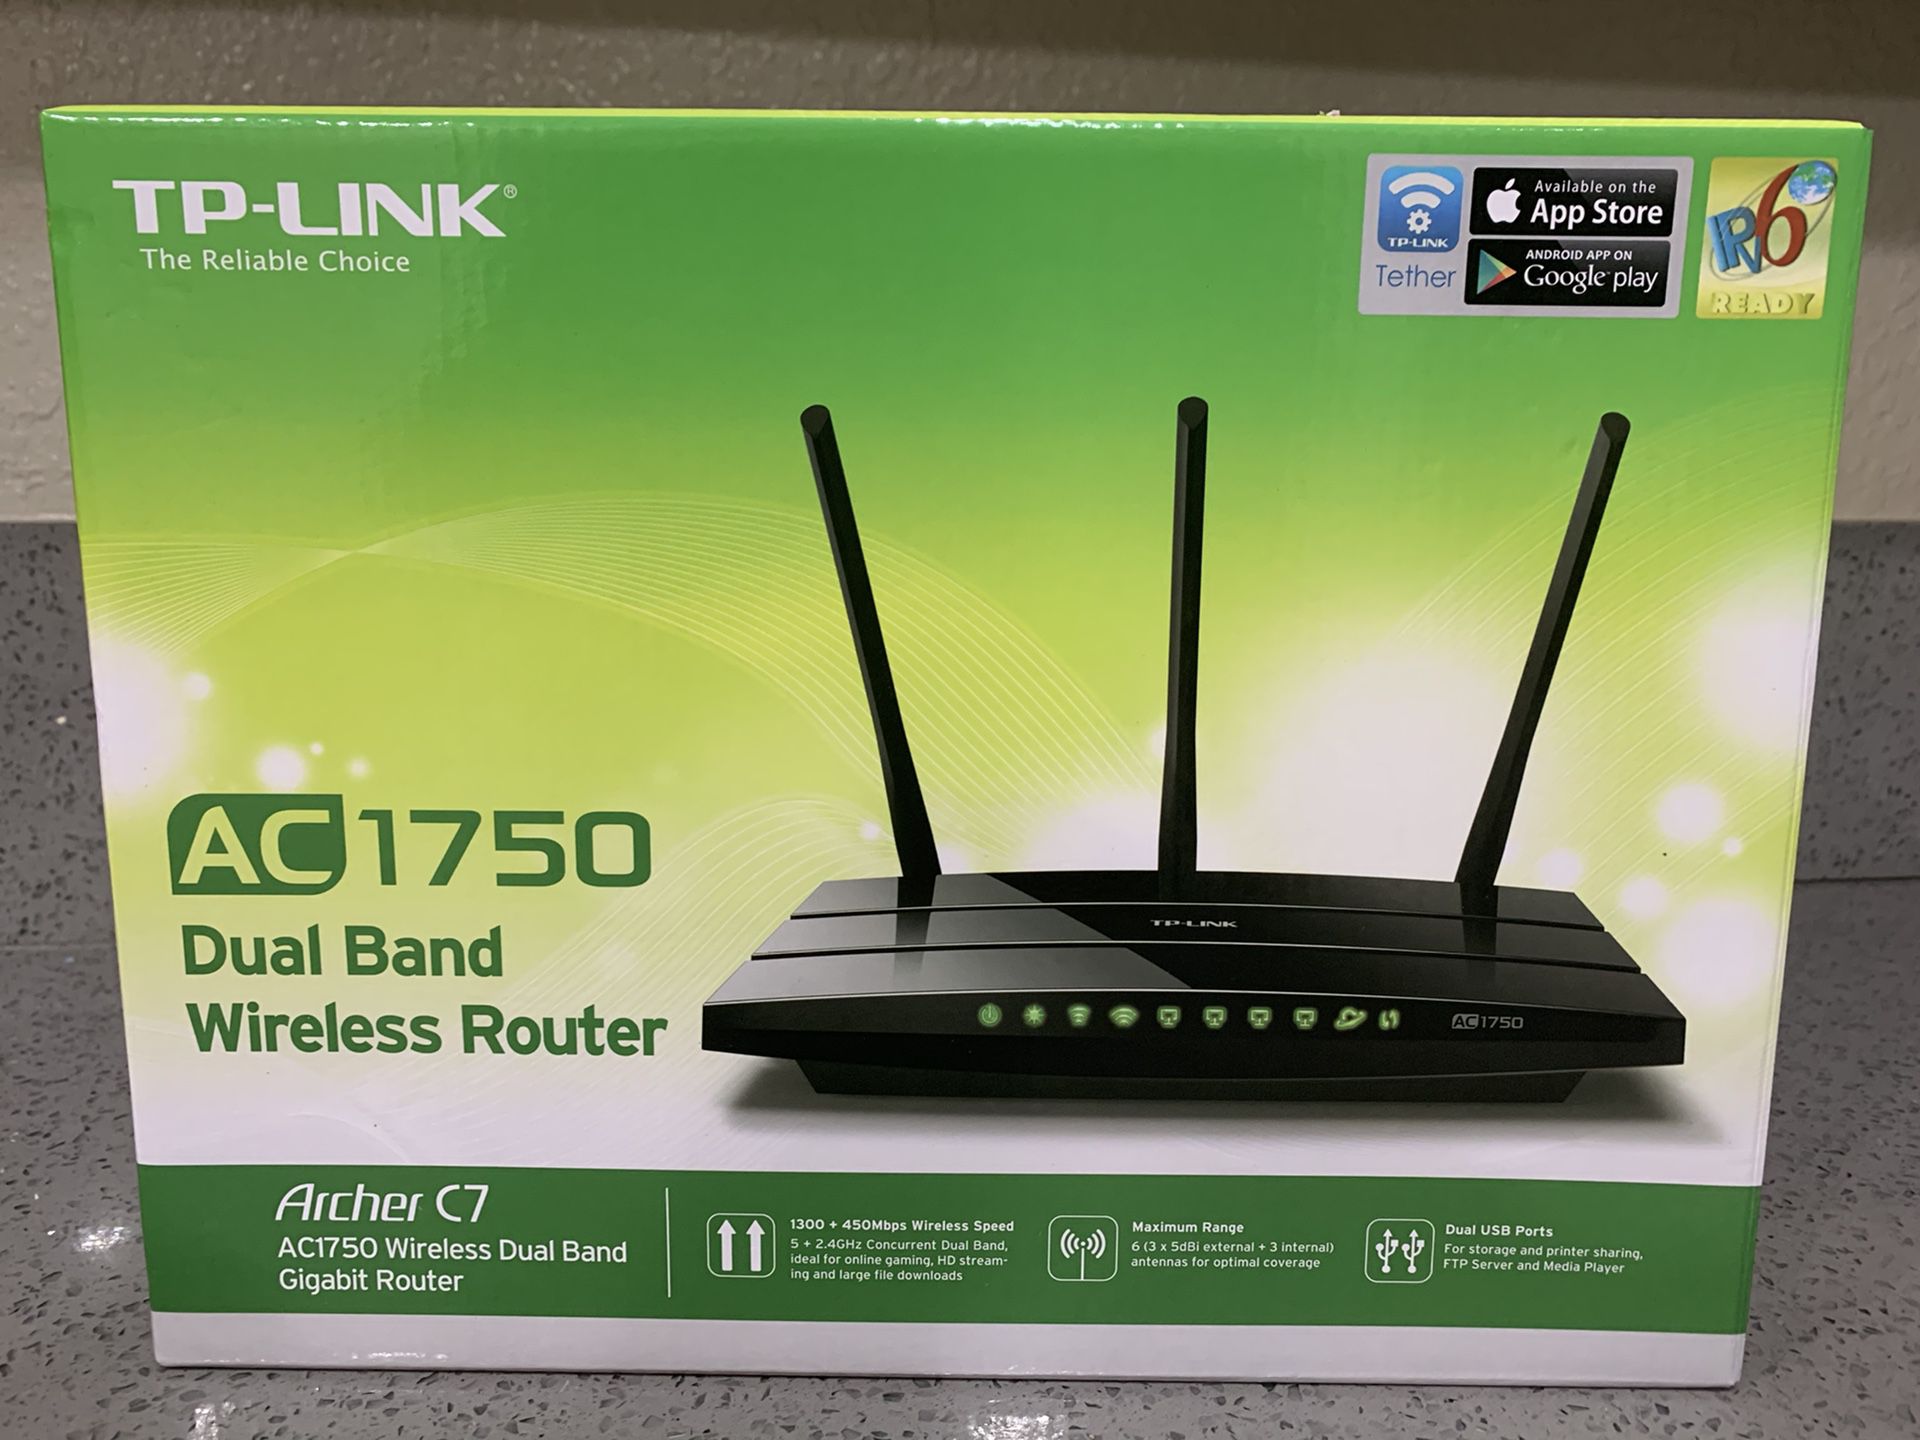 Wireless router (internet), electronics